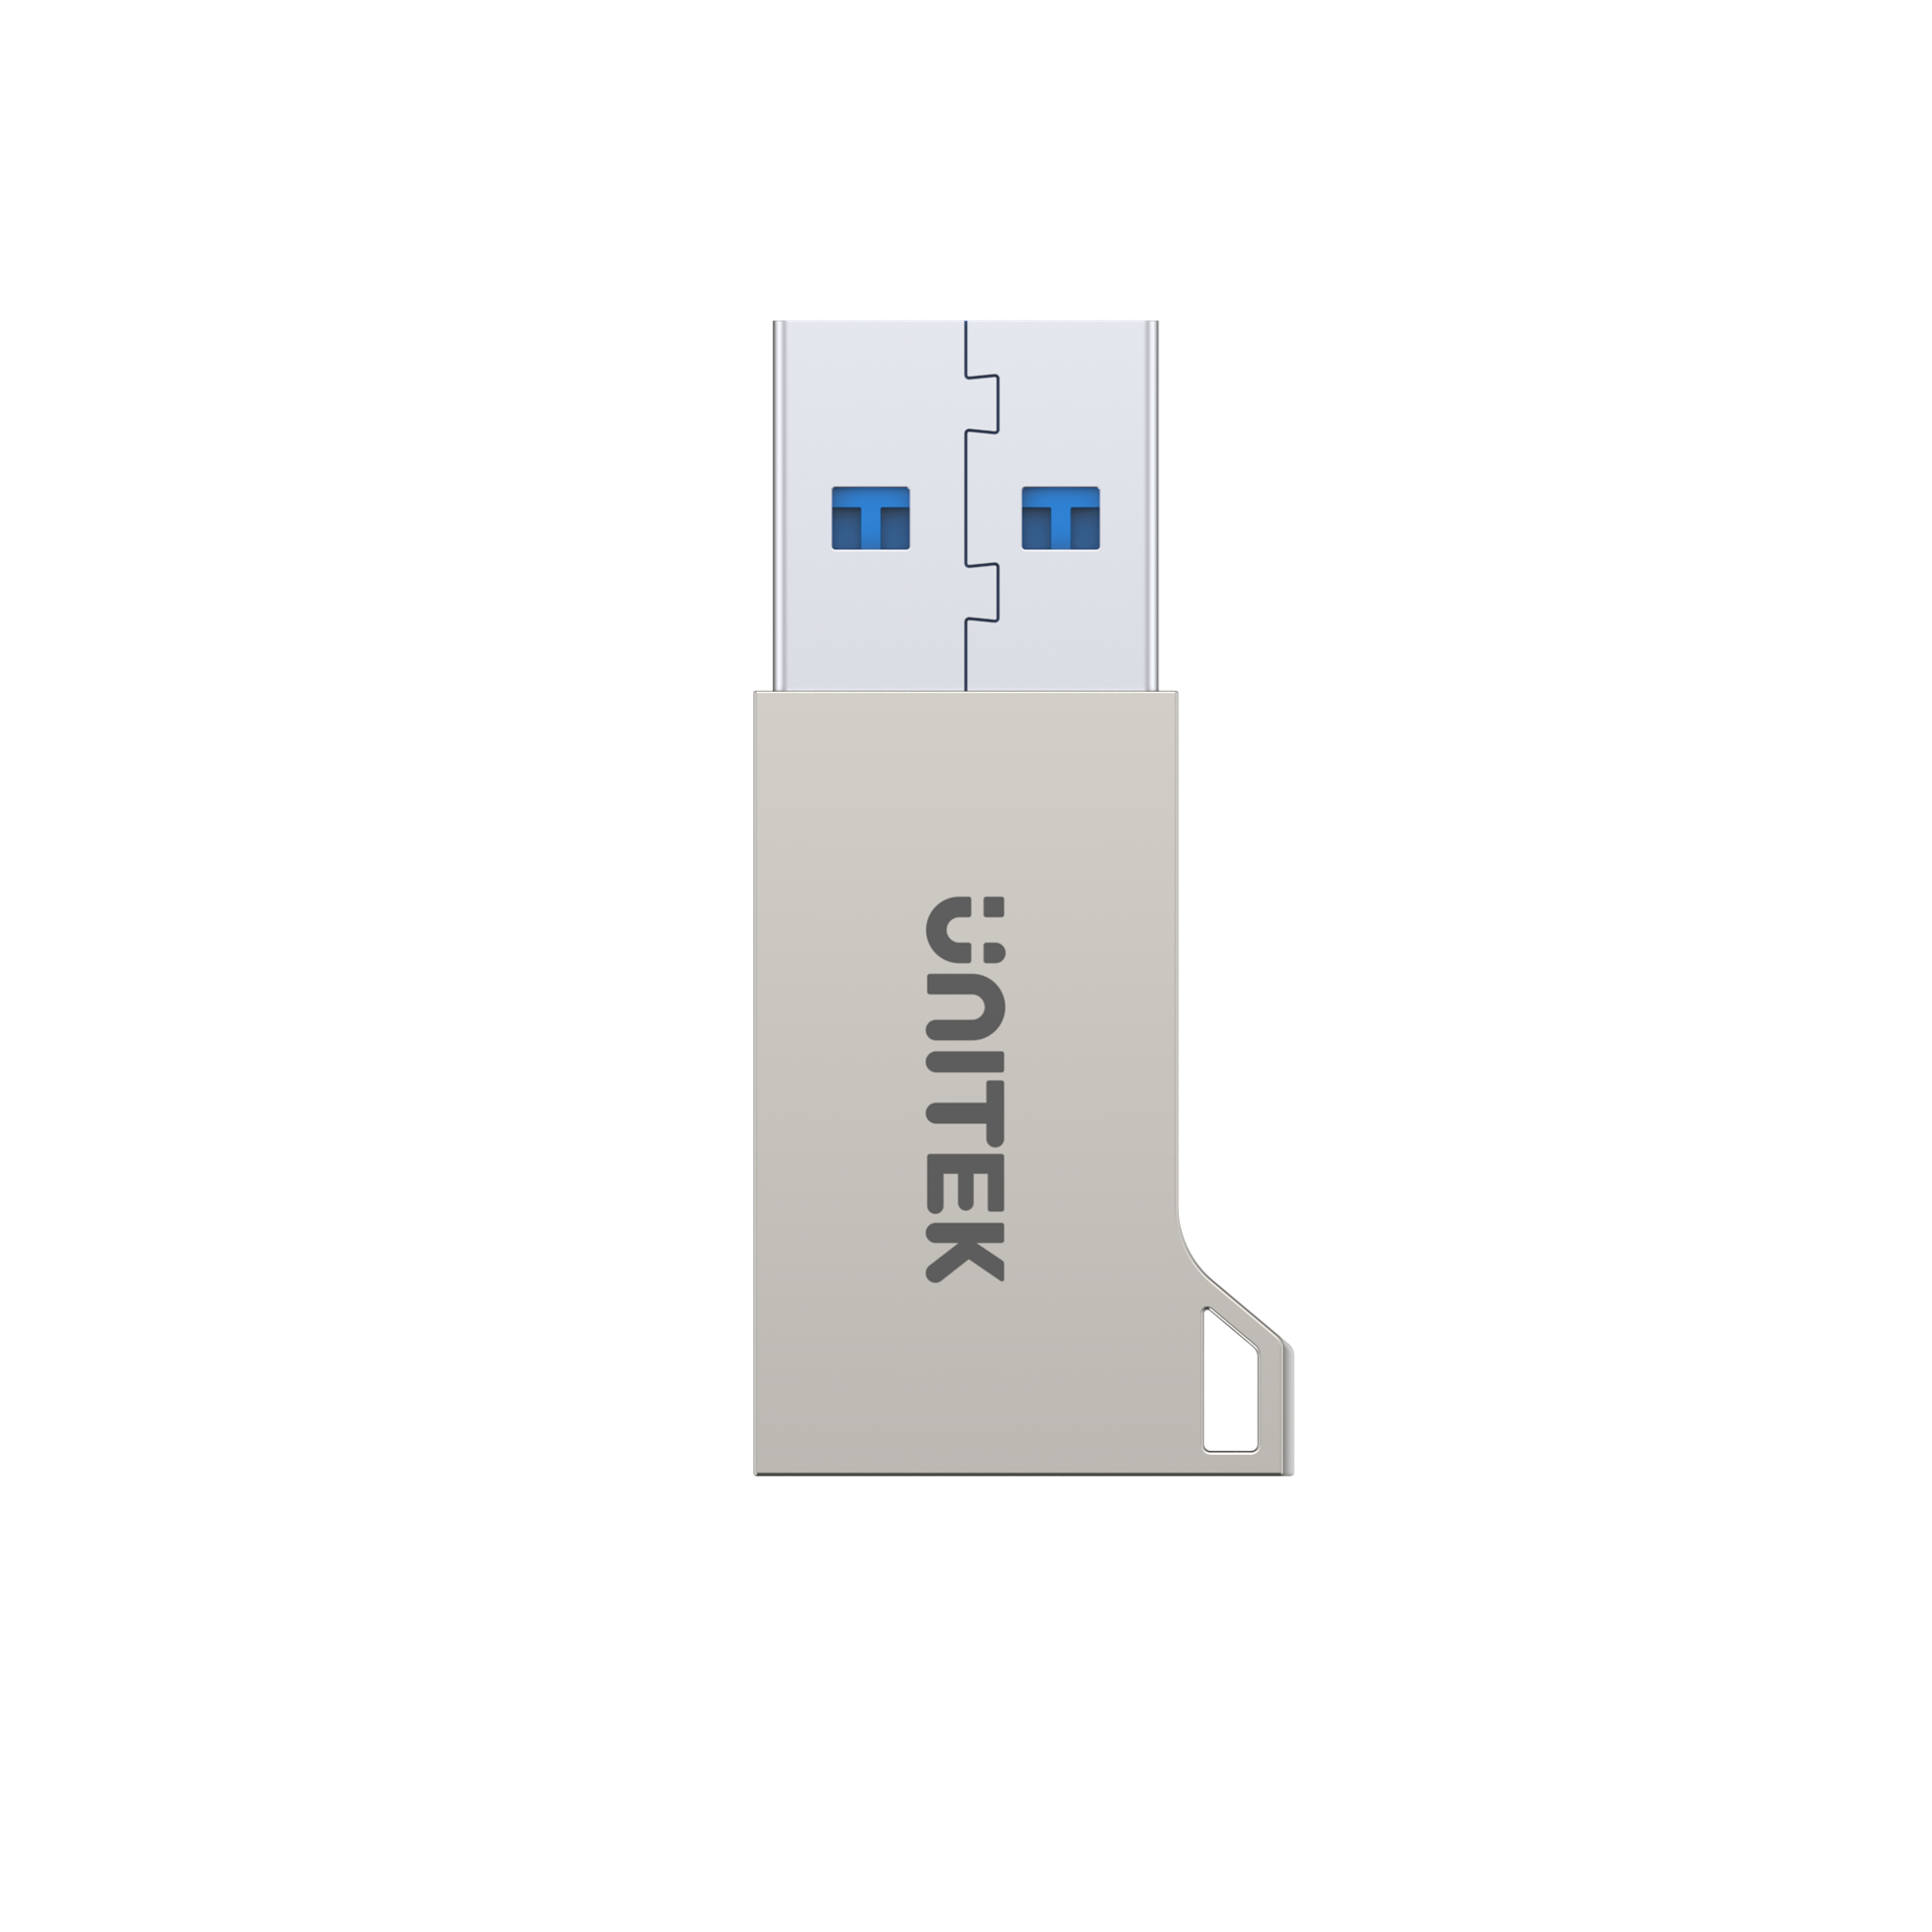 UNITEK_USB-A_Male_to_USB-C_Female_Ultra-Tiny_Adaptor_with_Easy_Grip_Design._Supports_Superspeed_5Gbps._Built_Tough_with_Zinc-Alloy_Housing_&_Keychain_Eye._Supports_QC3.0_&_up_to_9V/2A_Charging. 36